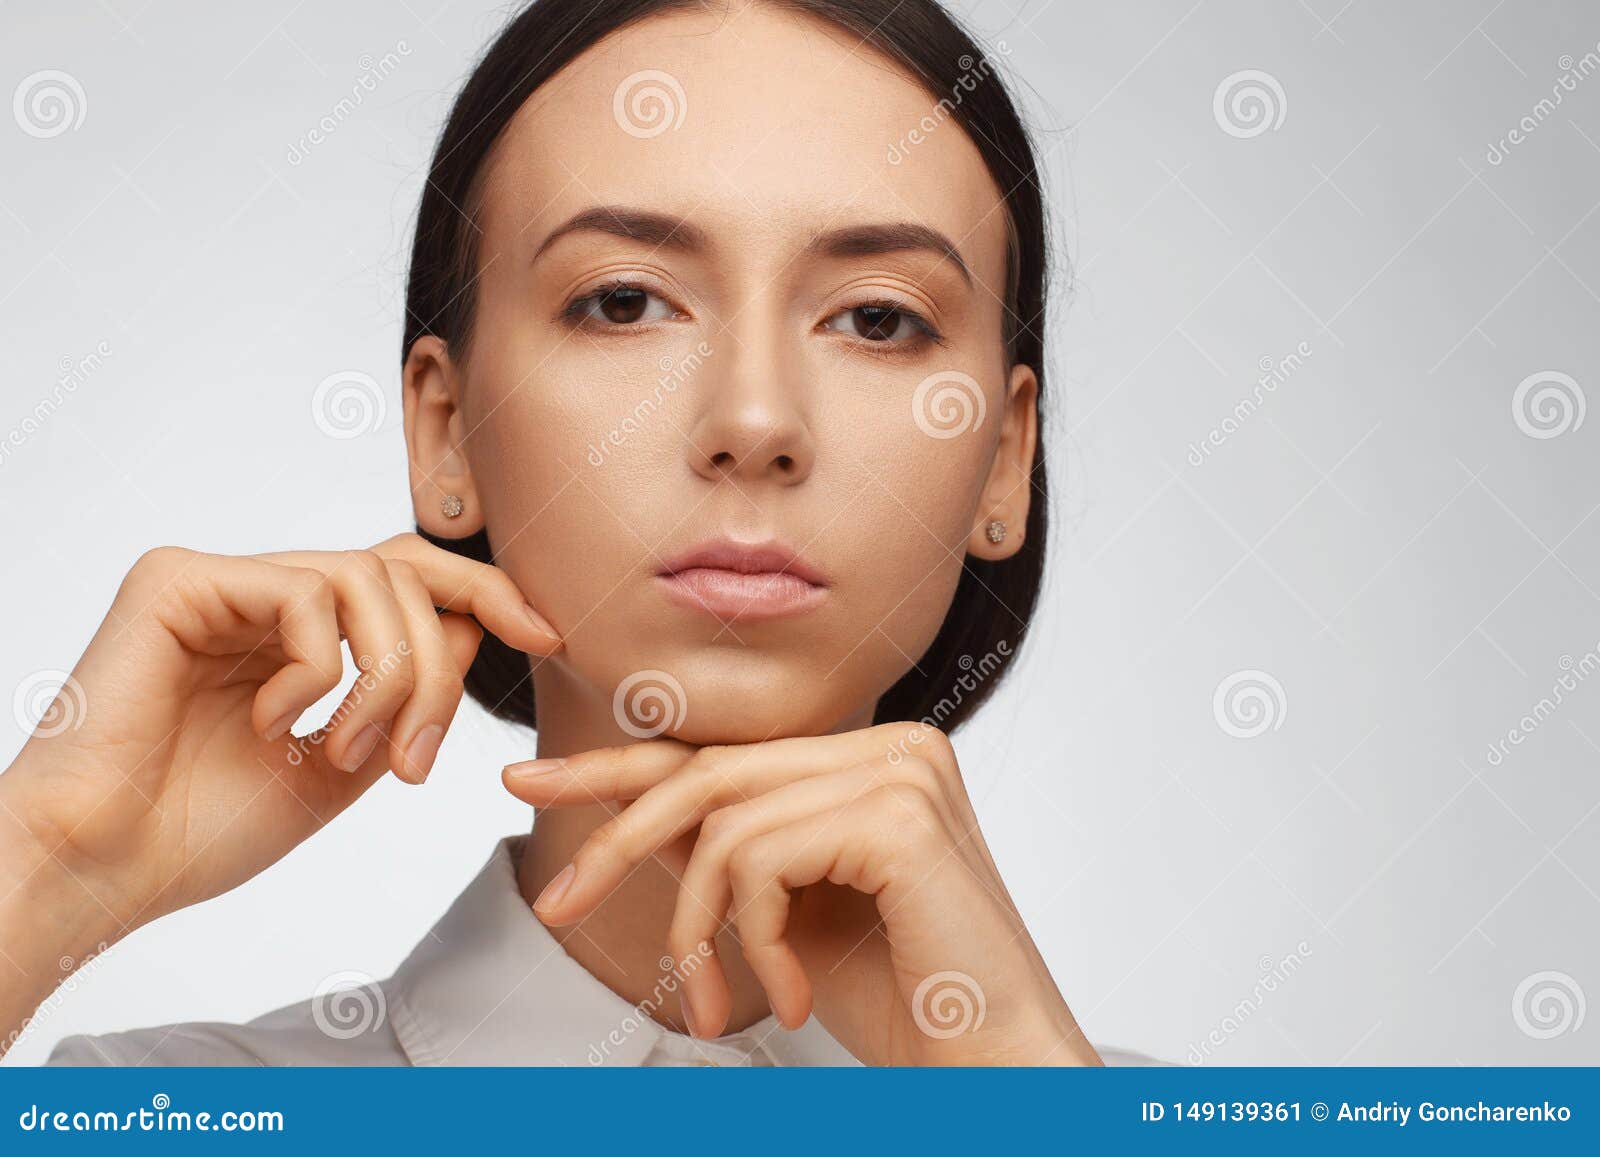 portrait of a beautiful pacified woman in a white shirt on a light background